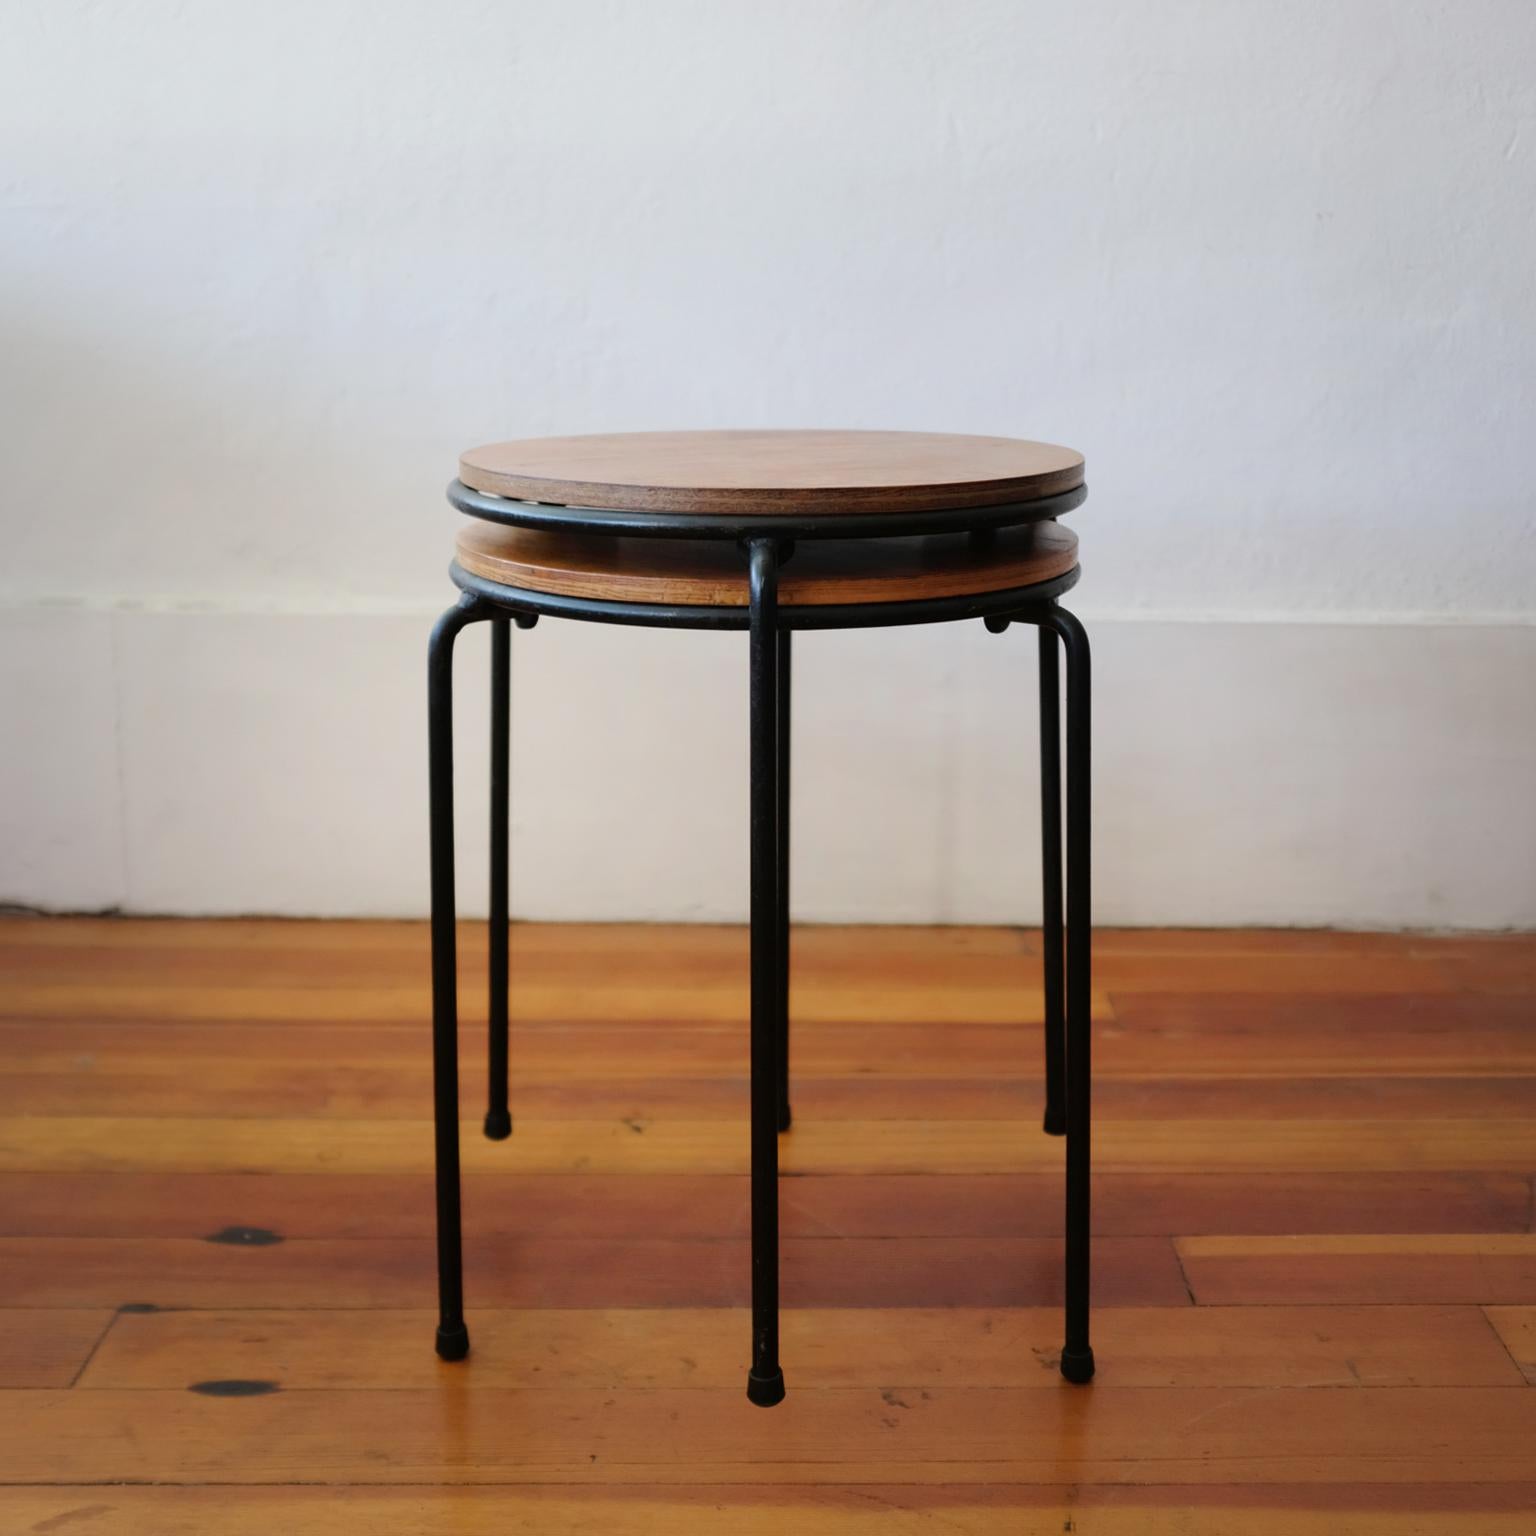 American Pair of Iron and Walnut Tables or Stools, 1950s For Sale